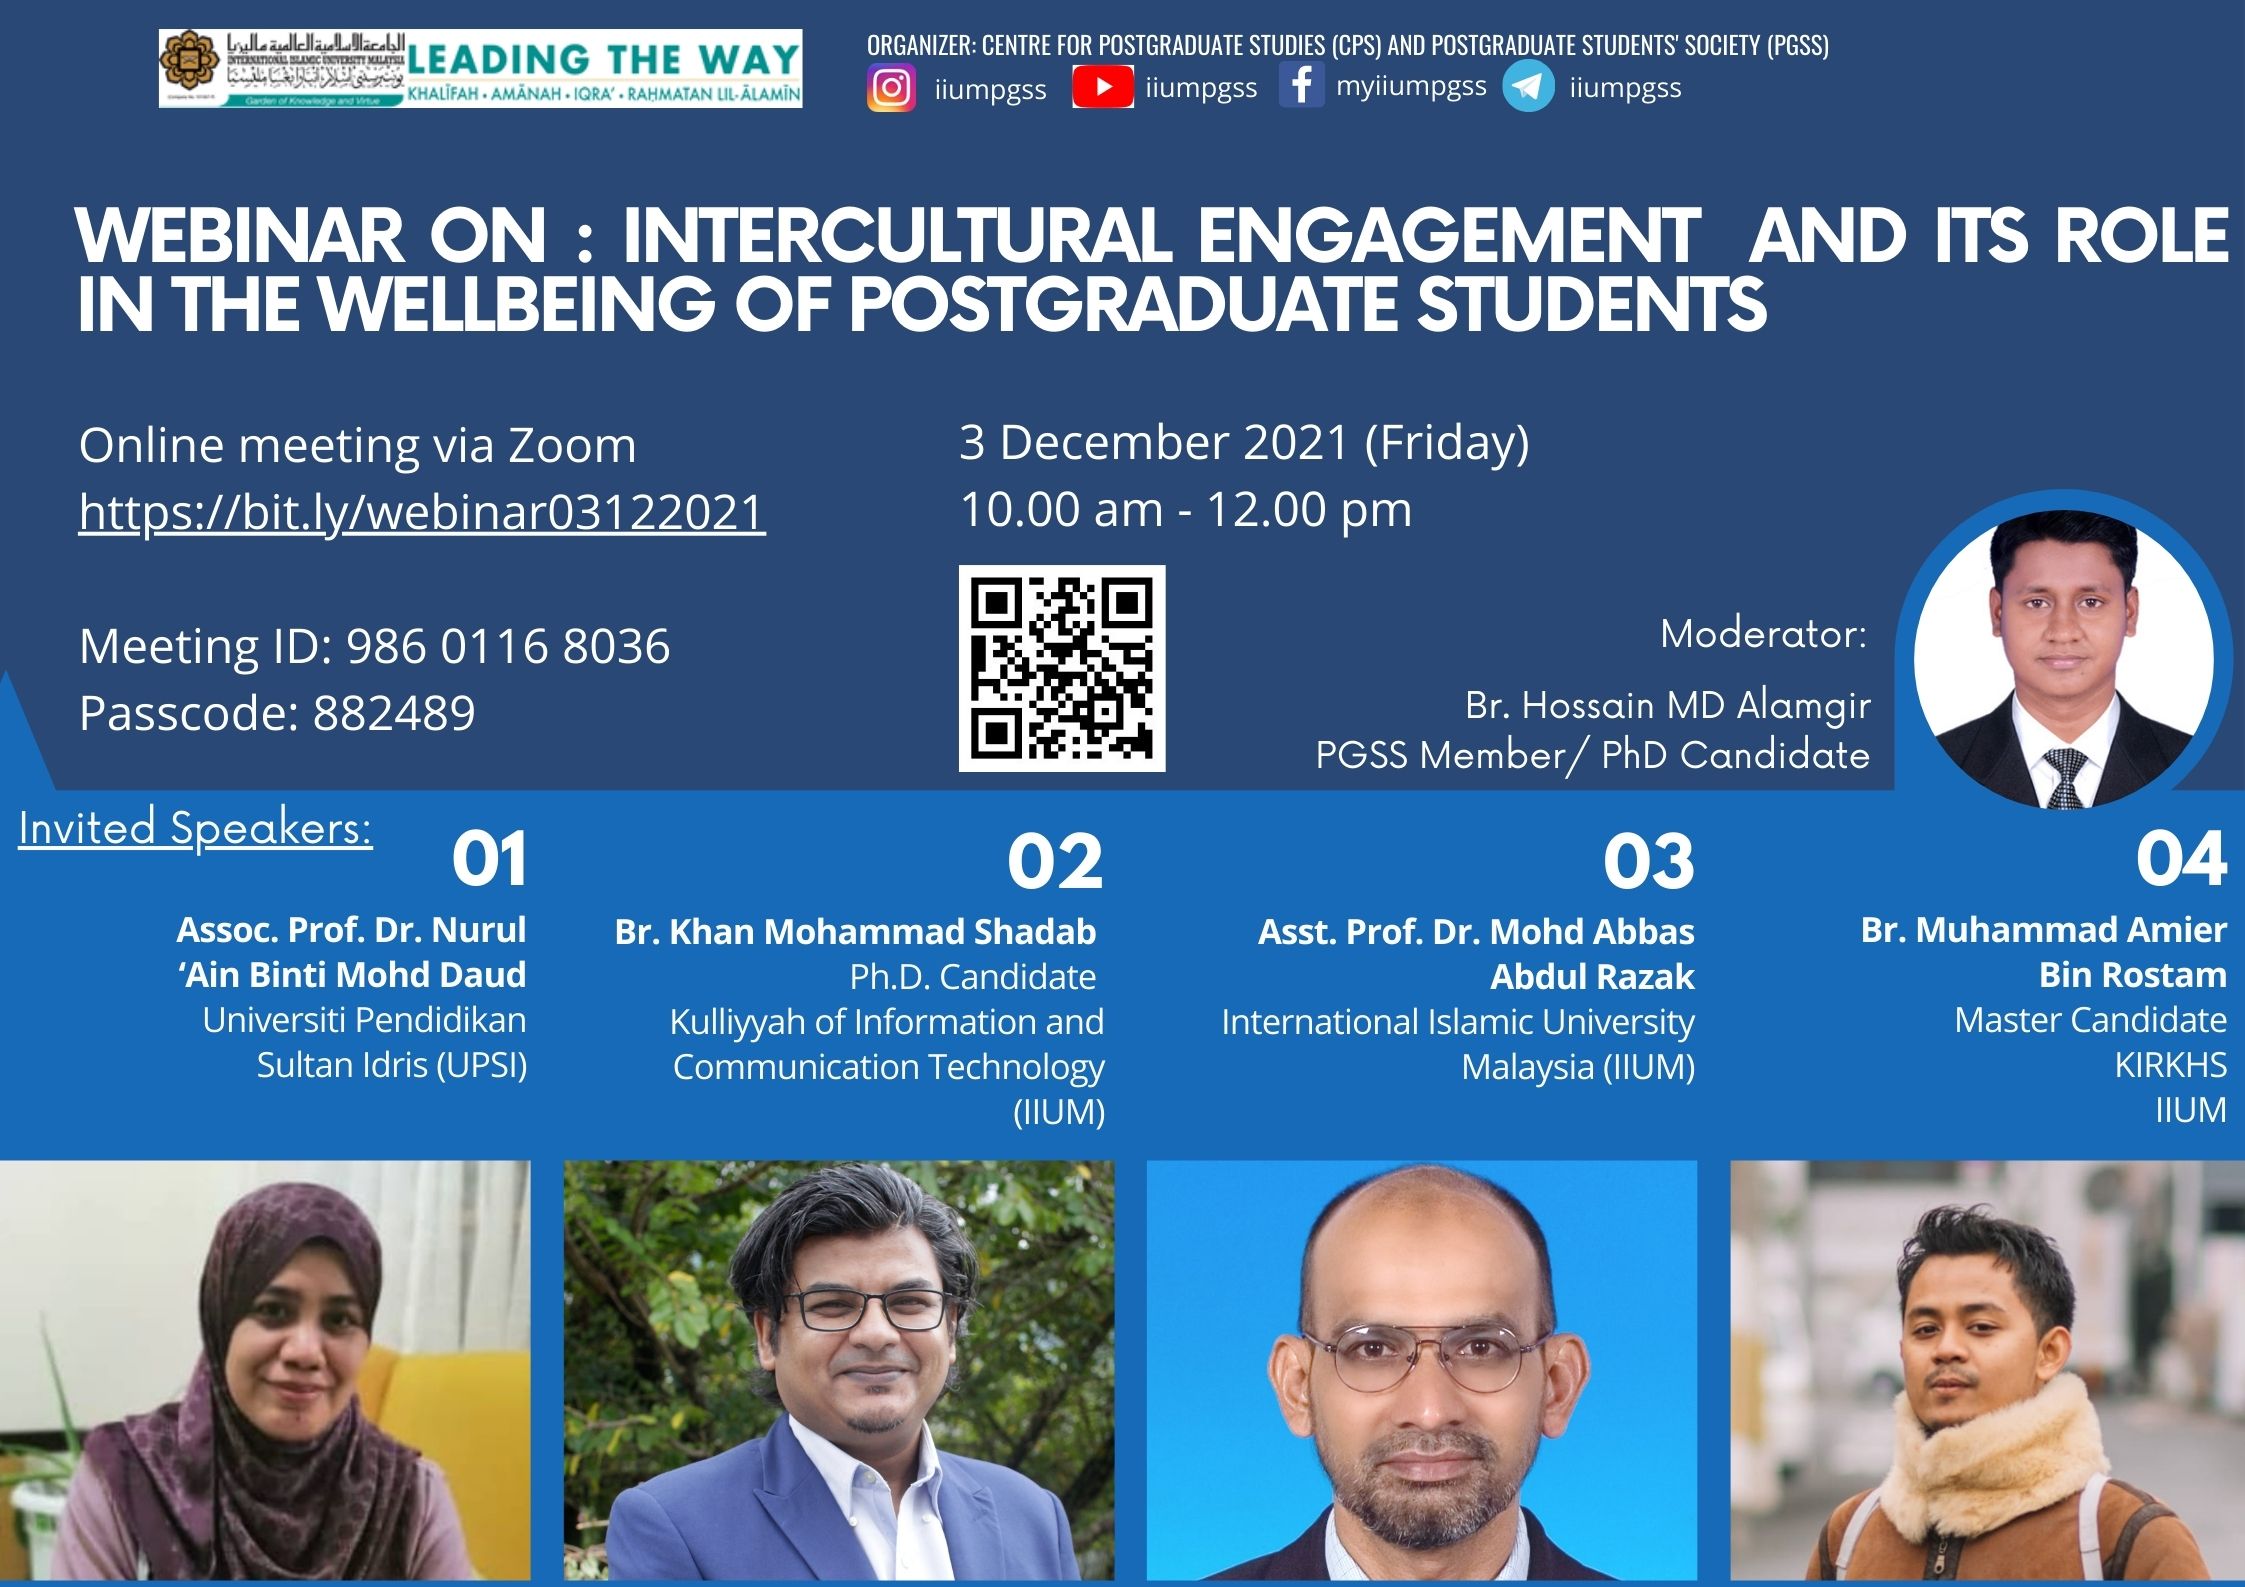 ​INVITATION TO ATTEND WEBINAR ON INTERCULTURAL ENGAGEMENT AND ITS ROLE IN THE WELLBEING OF POSTGRADUATE STUDENTS